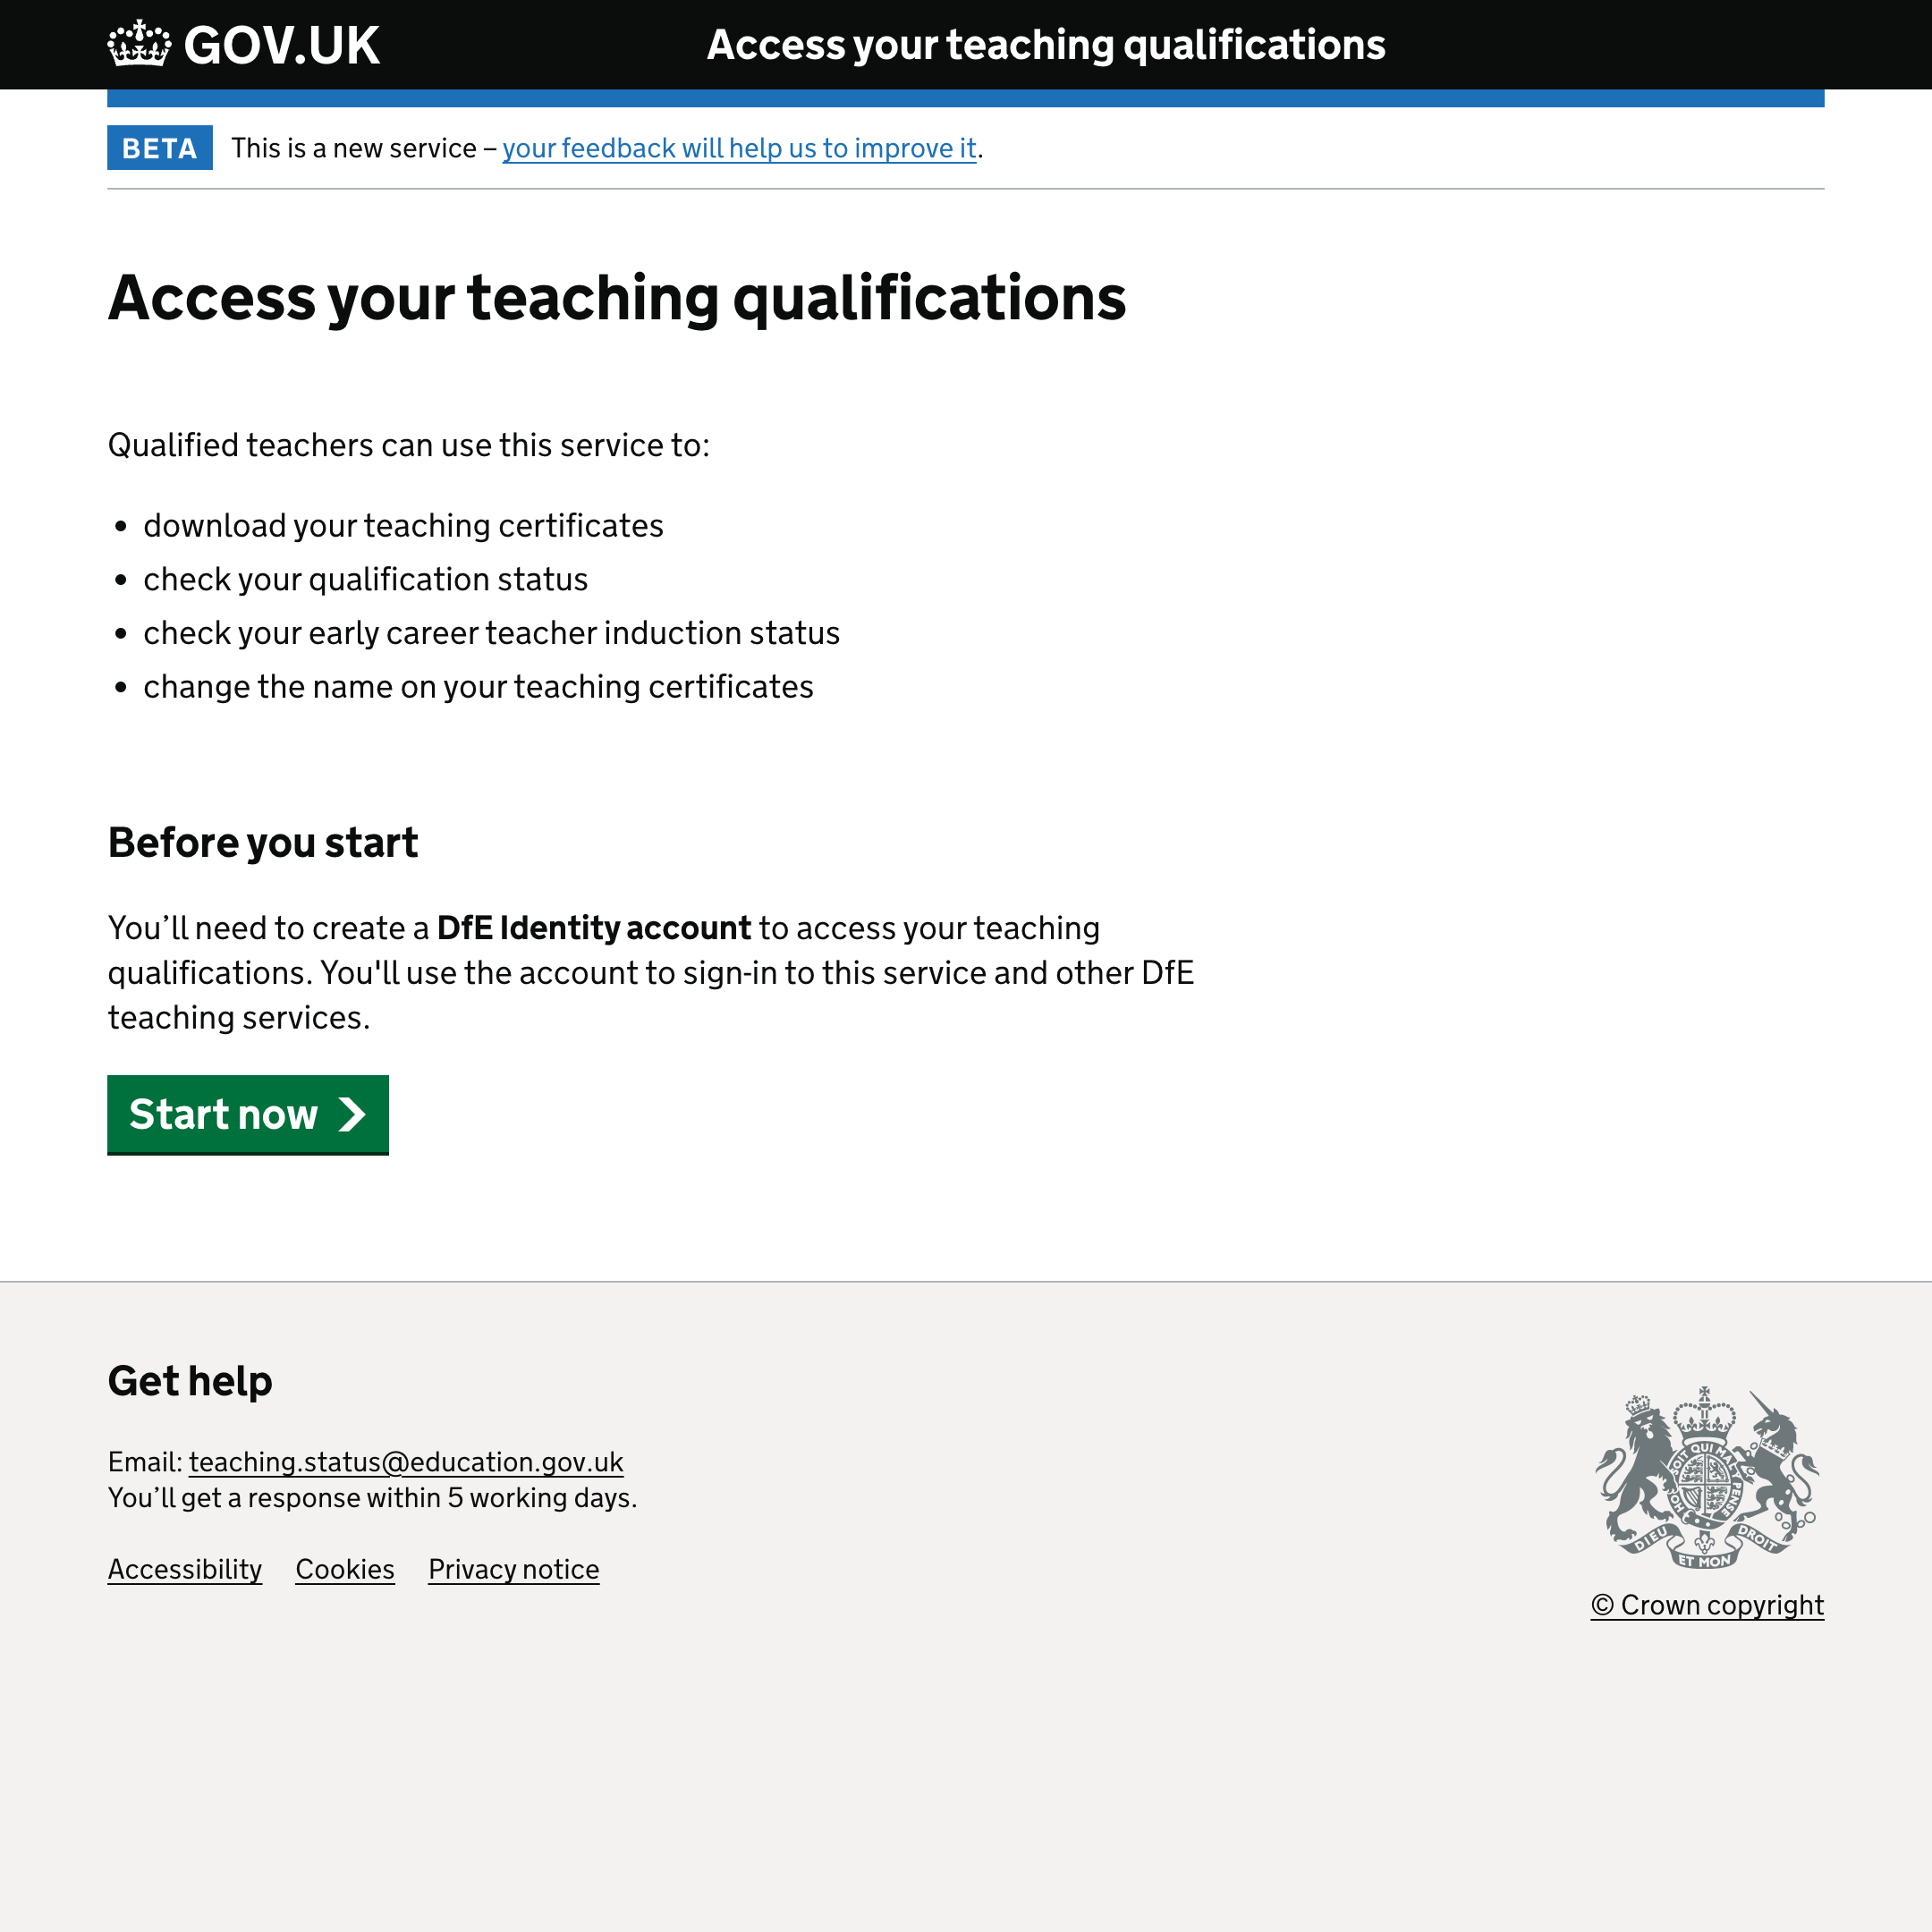 Access your teaching qualifications